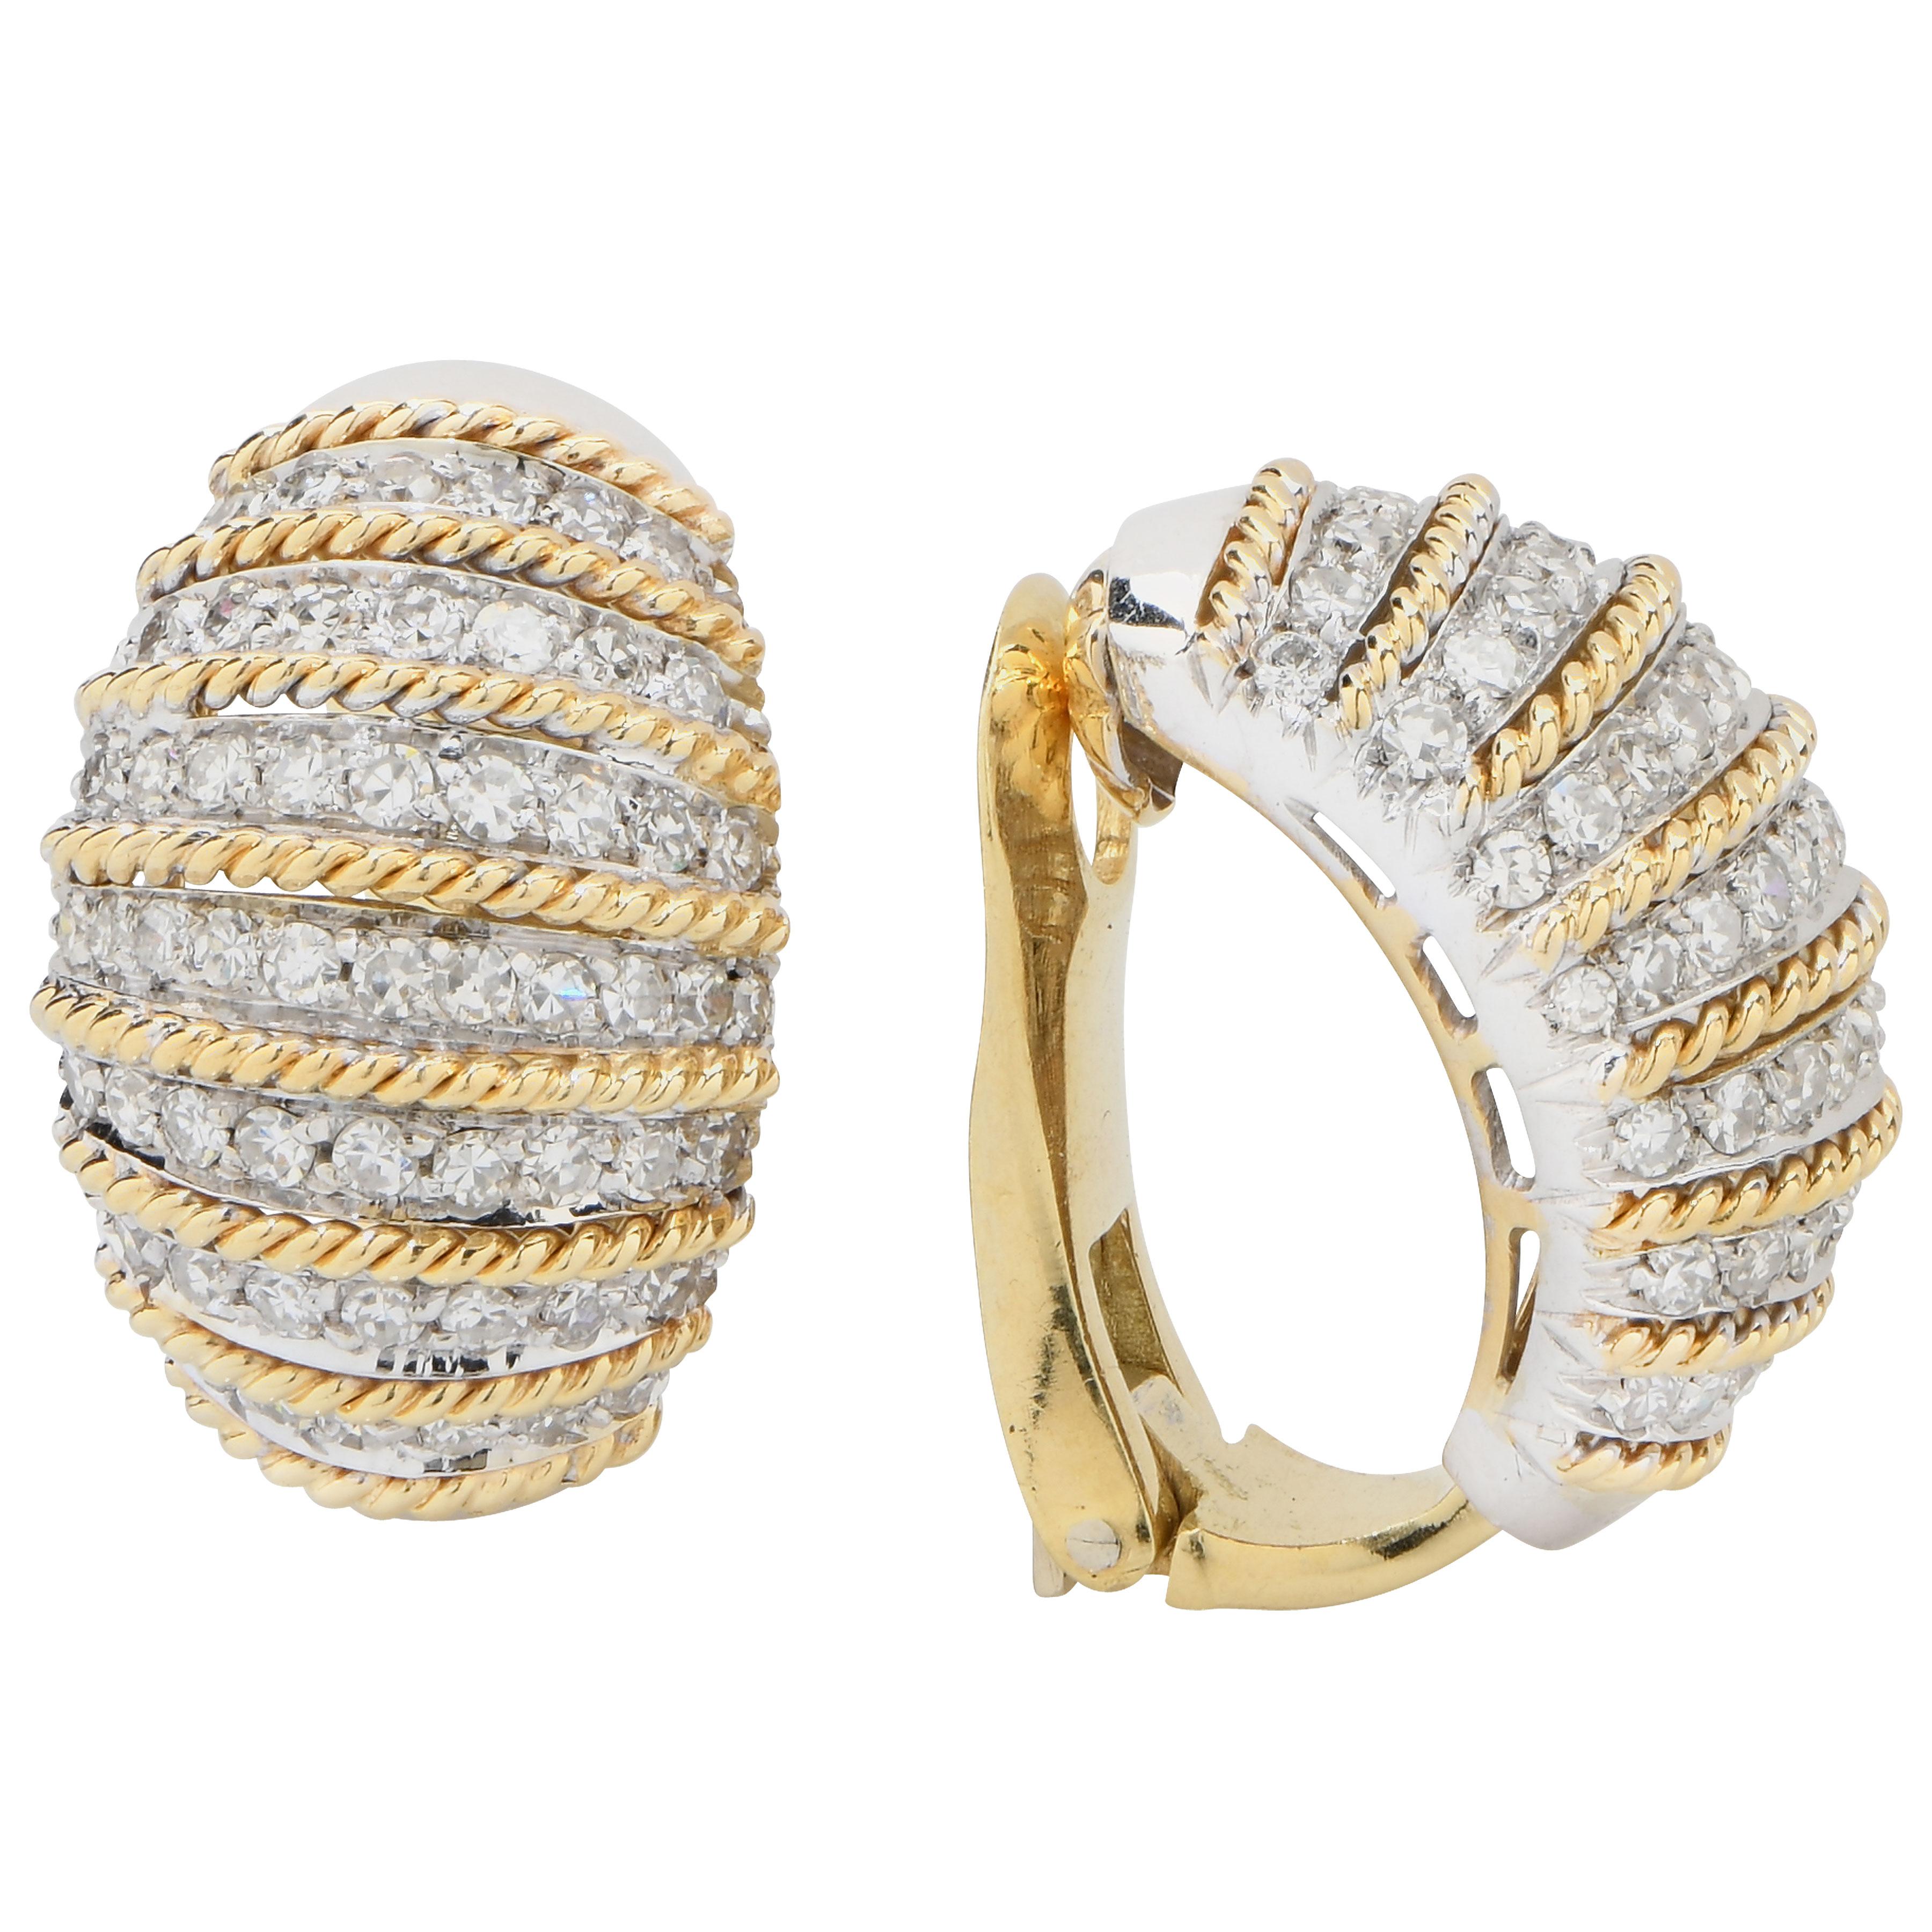 Italian Diamond Earrings in 18 Karat Yellow Gold with 114 single cut diamonds with an estimated total weight of 1.14 carat.
Metal Weight: 16.1 Grams